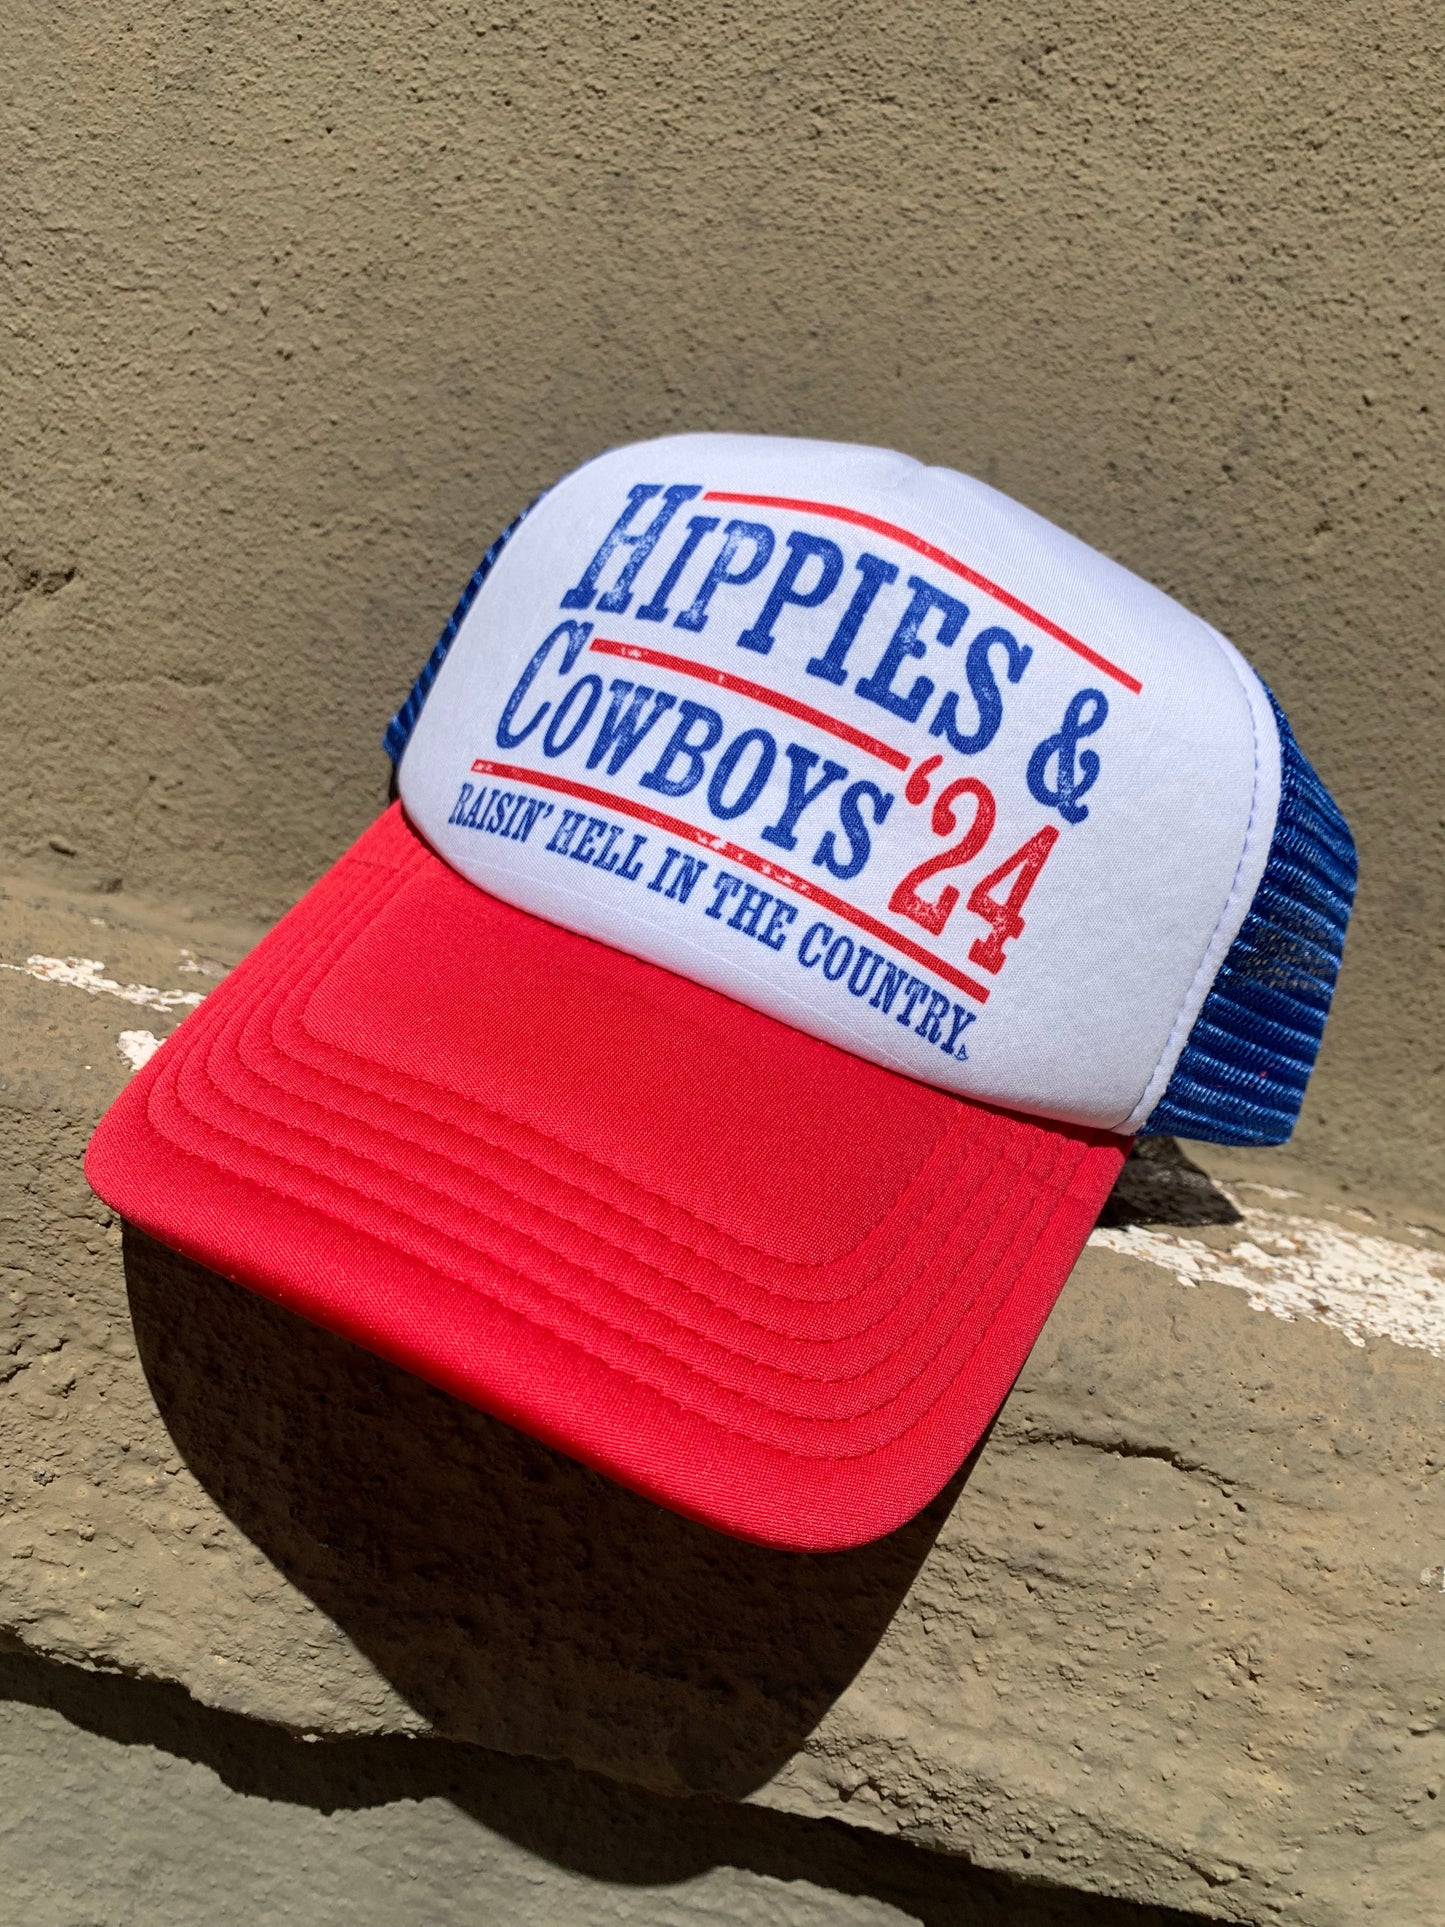 Hippies & Cowboys '24 red and blue foam trucker hat